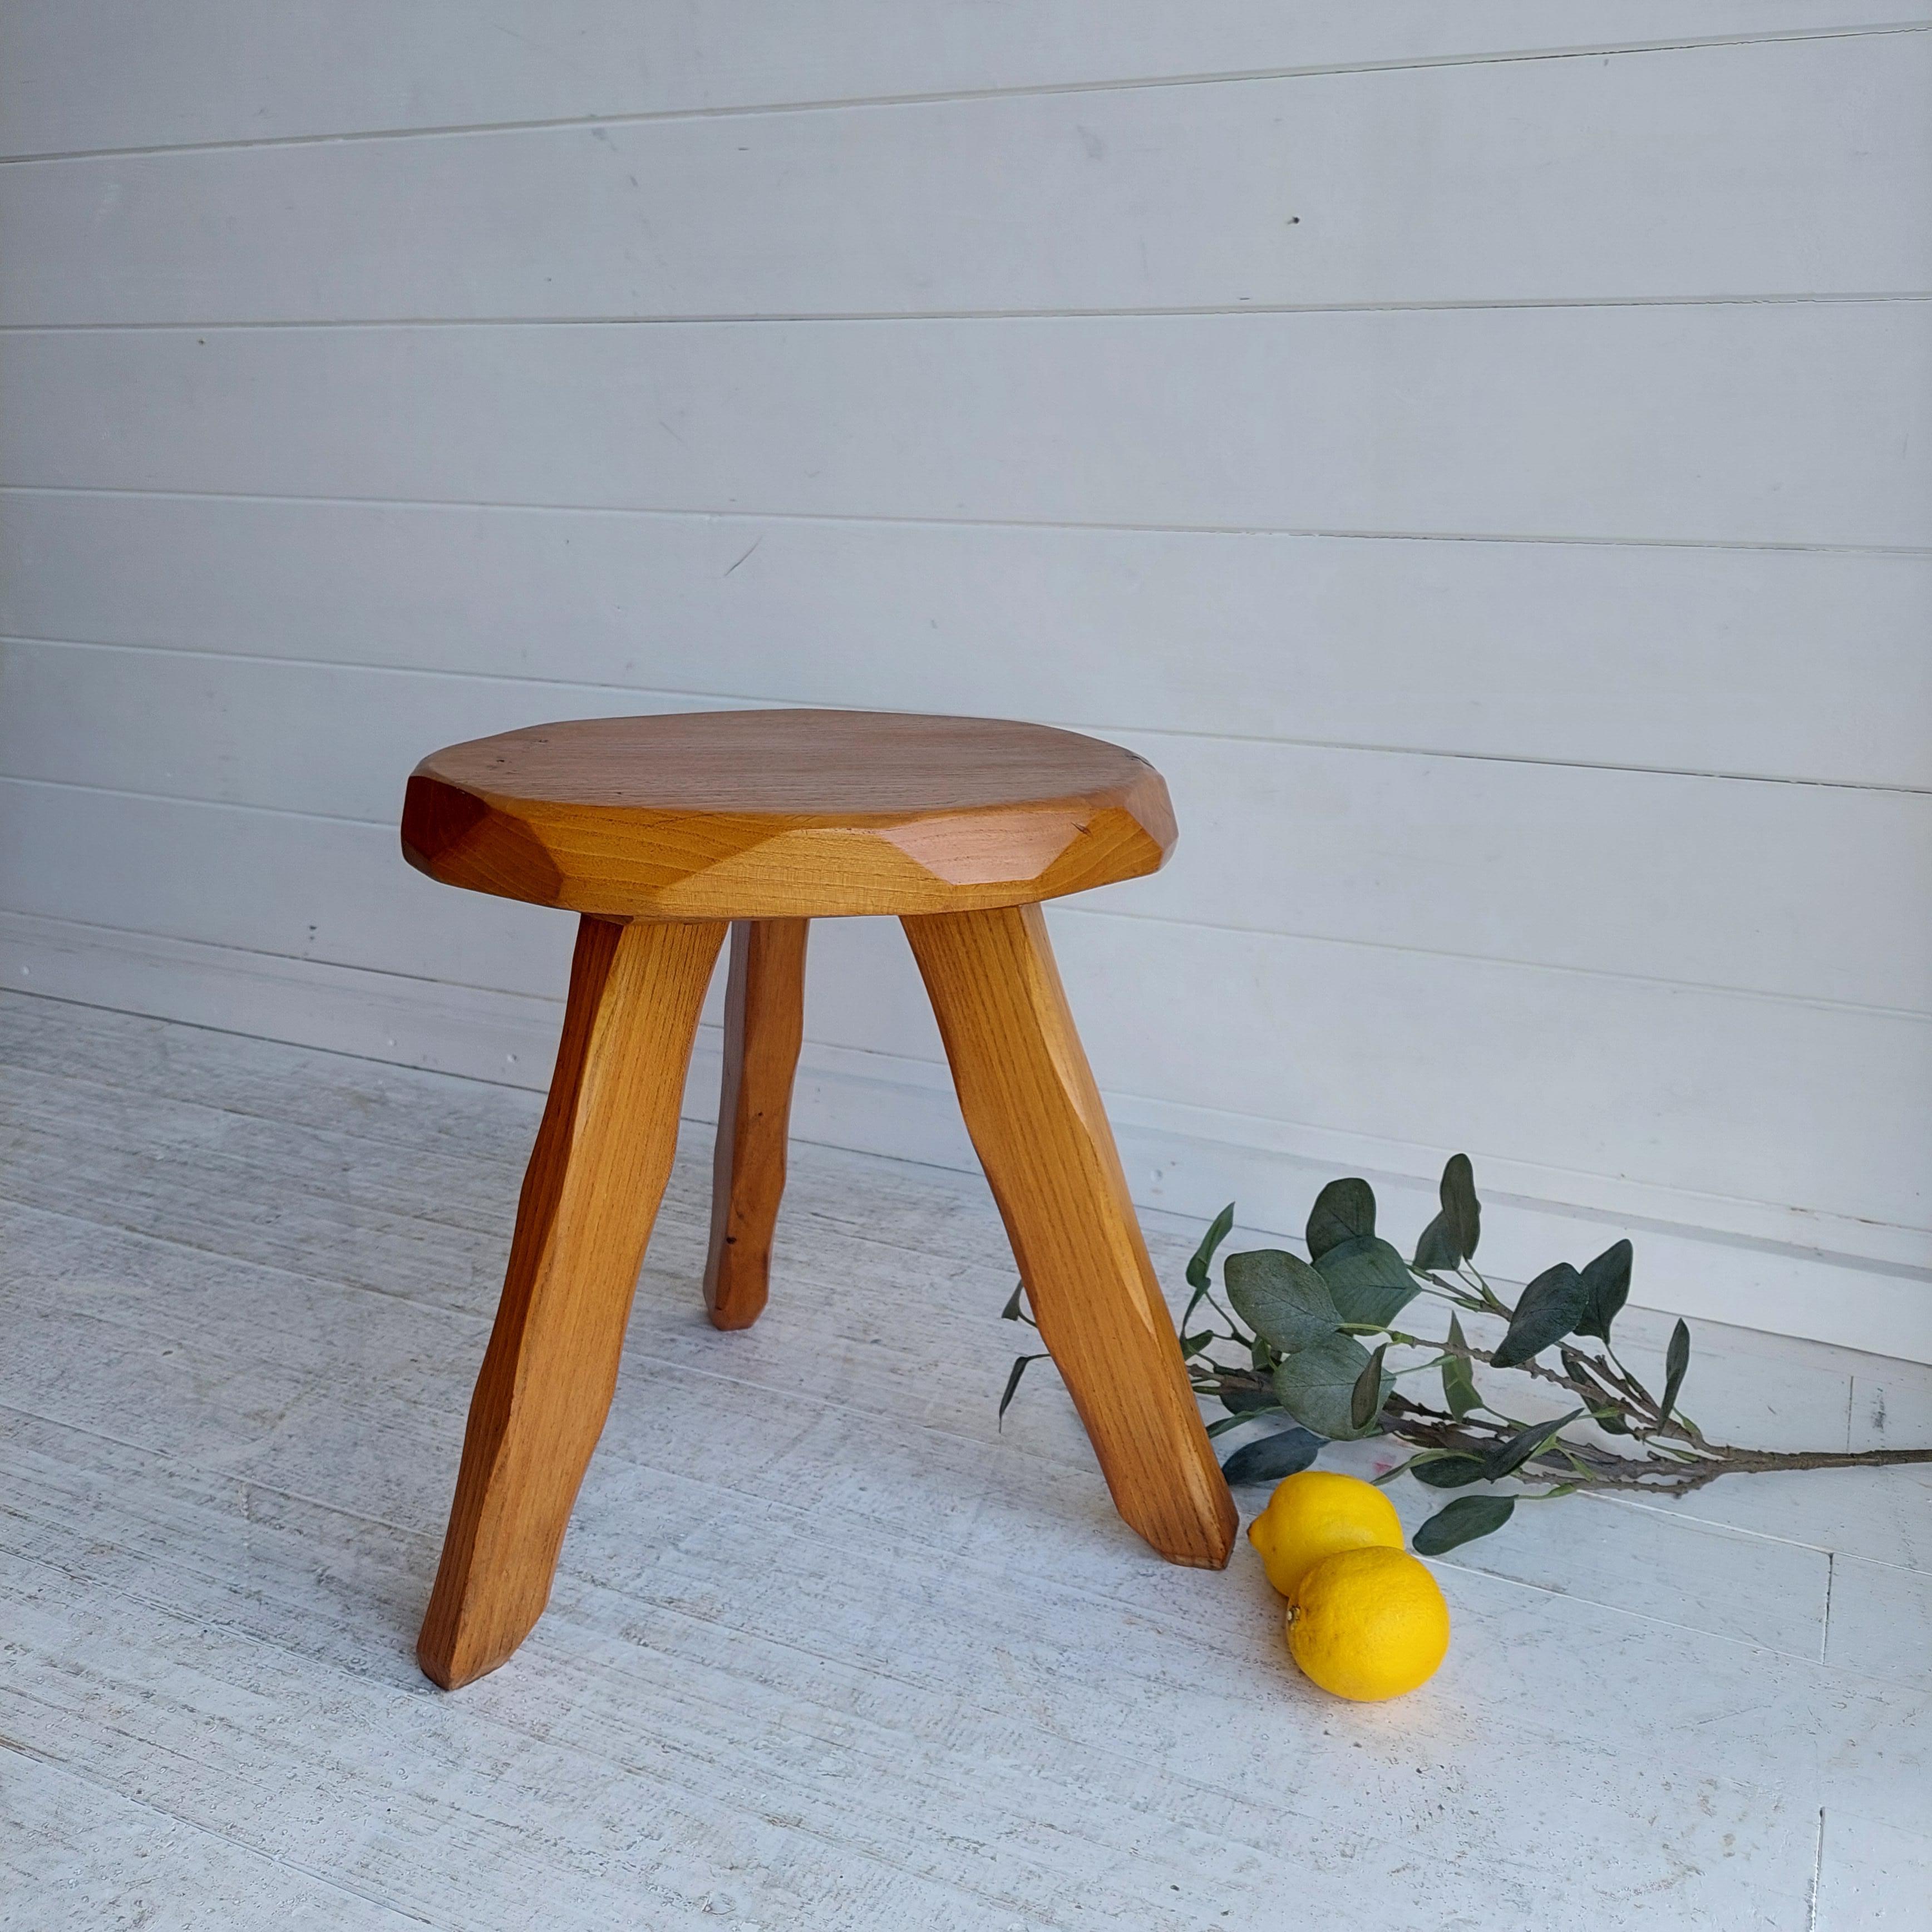 Milking stool or three-leg square stool, brutalist, rustic, unique 1960.
Made of Elm
Unique handmade piece

A very cute vintage wooden three legged milking stool
The splayed irregular wavy hand cut legs give the stool a distinctive look whilst hand